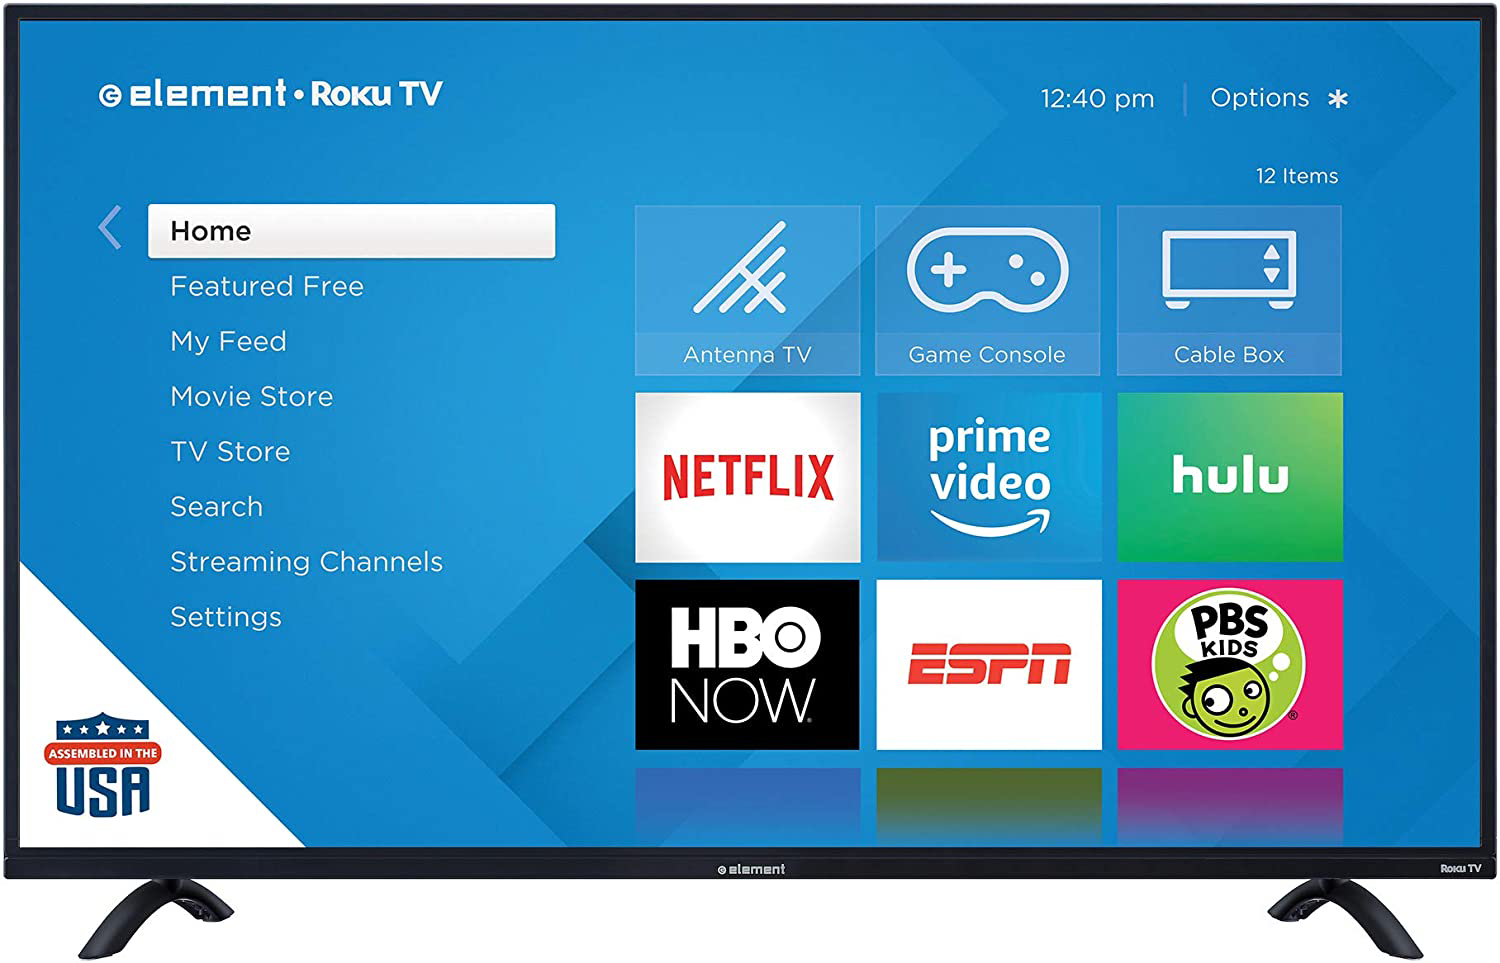 How to Turn On Roku TV Without Remote Using Physical Buttons